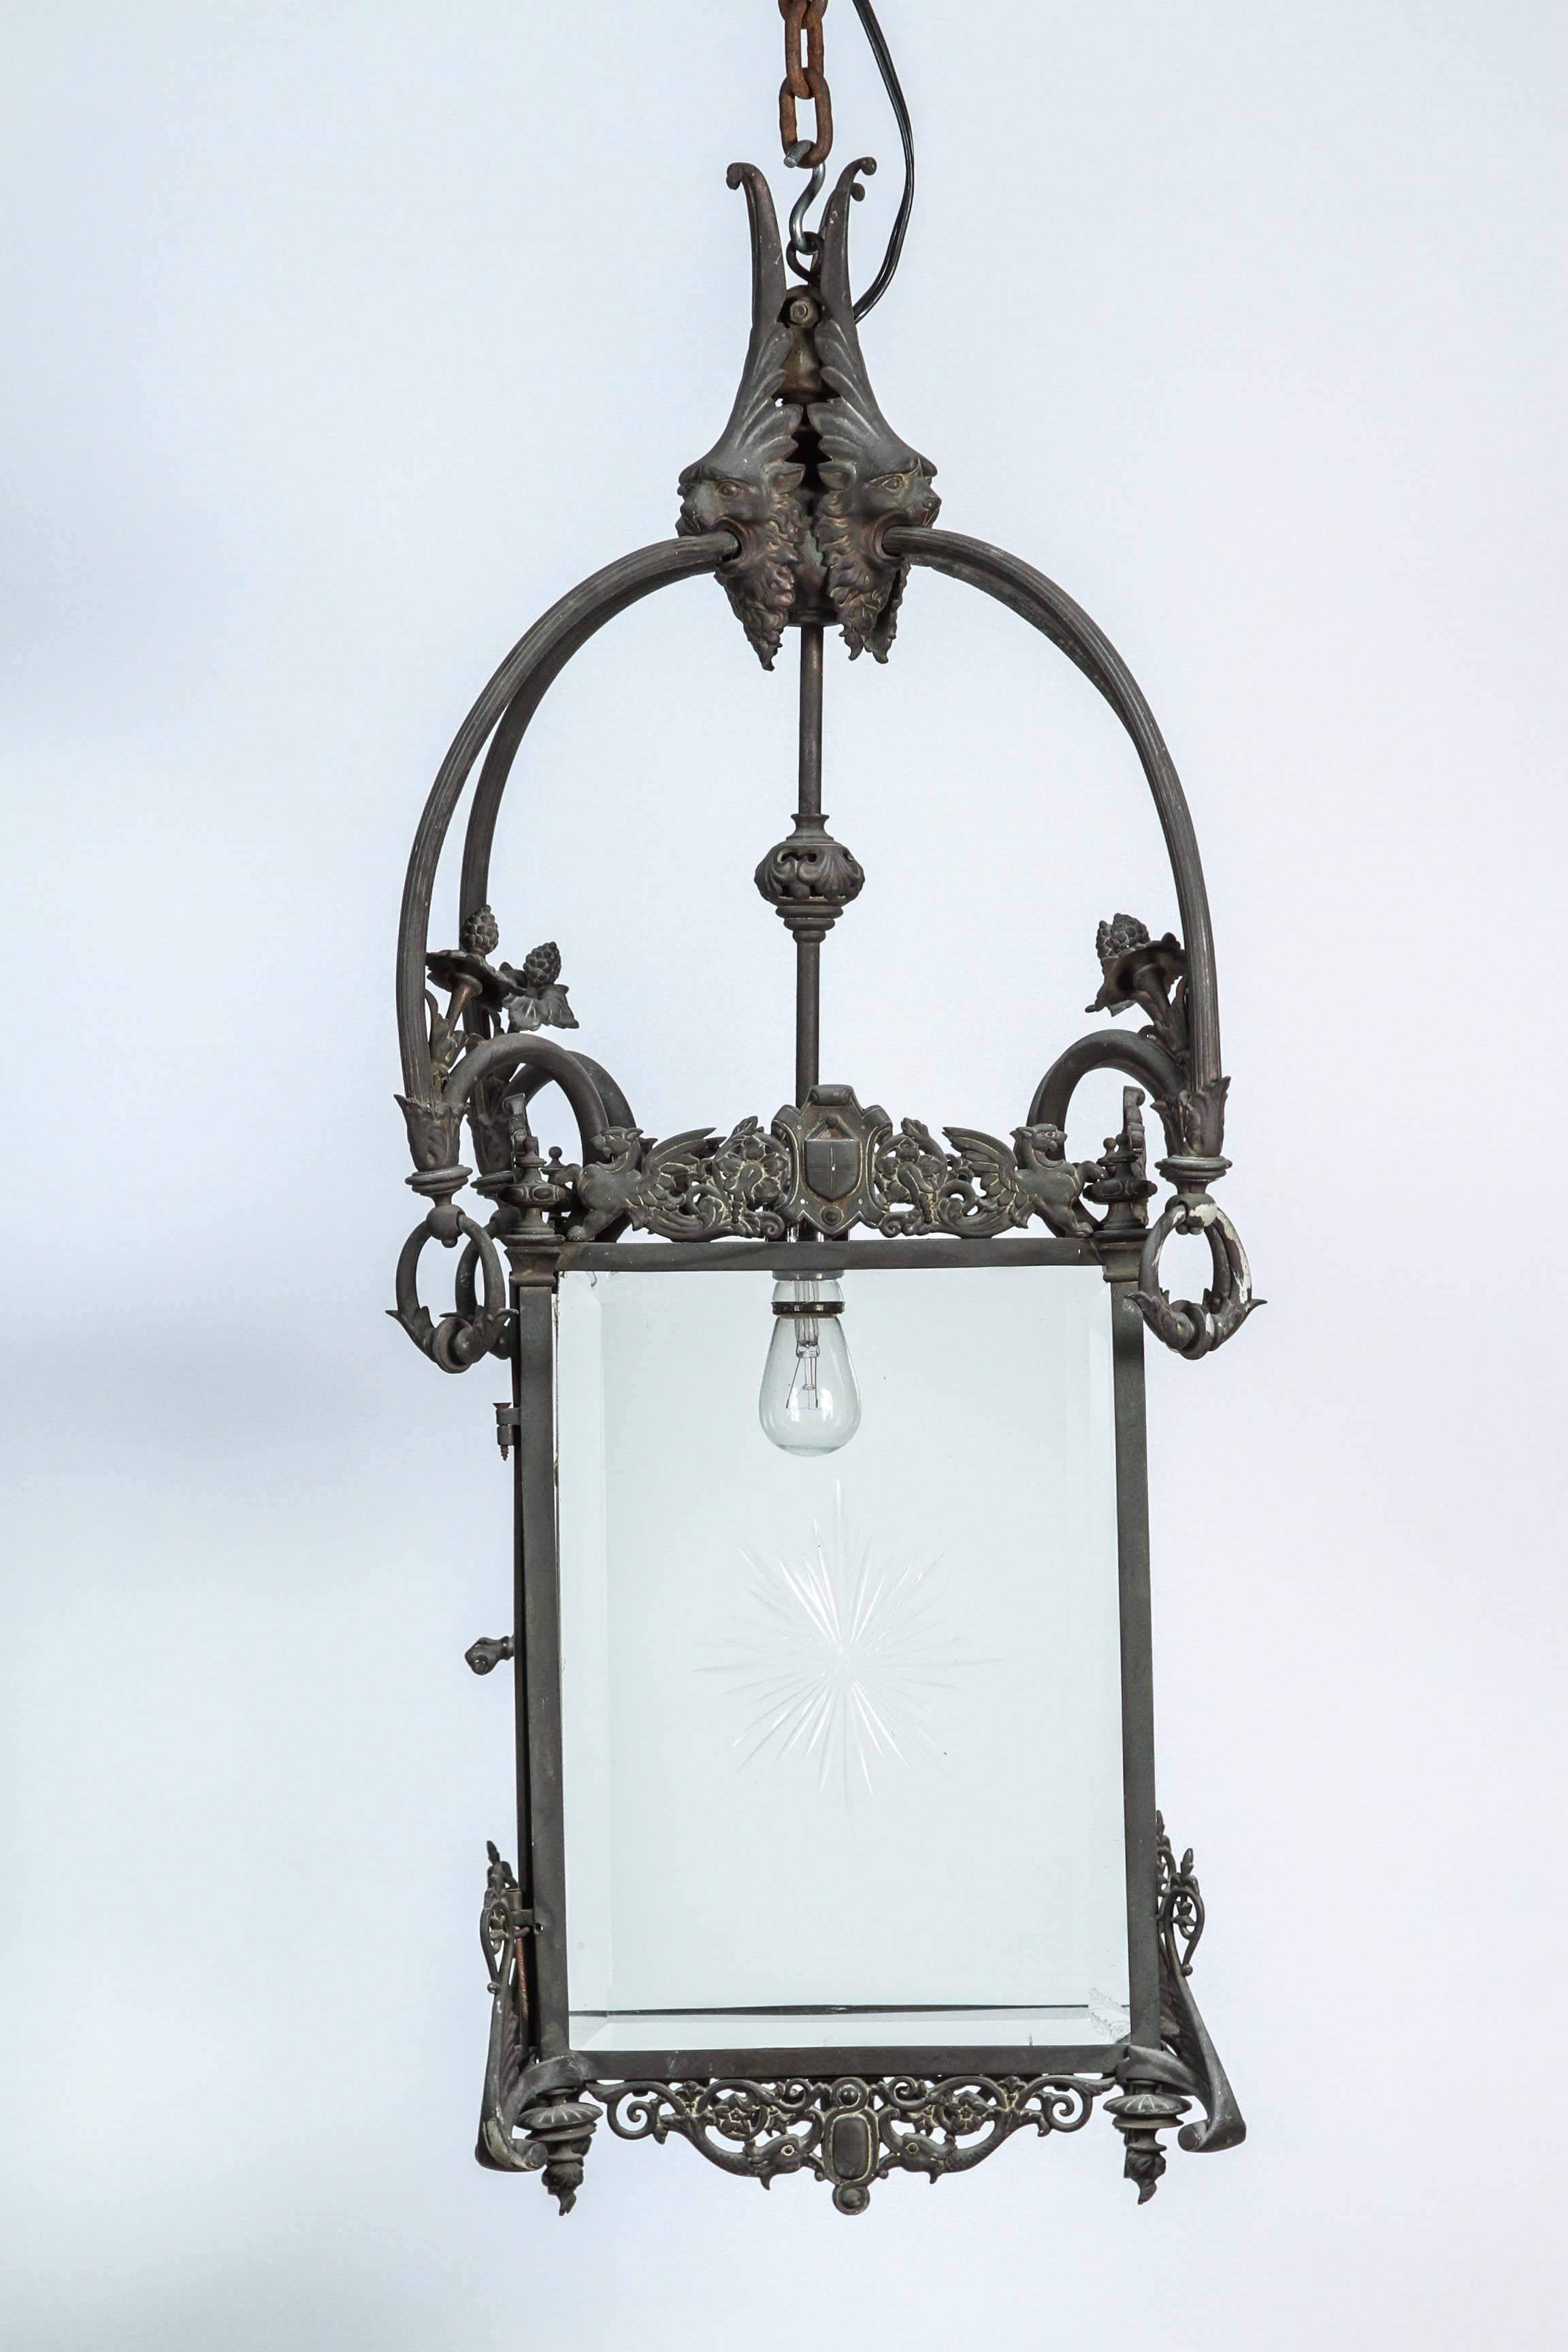 1930s square bronze lantern with etched glass. This can be seen at our 1800 South Grand Ave location in Downtown Los Angeles.